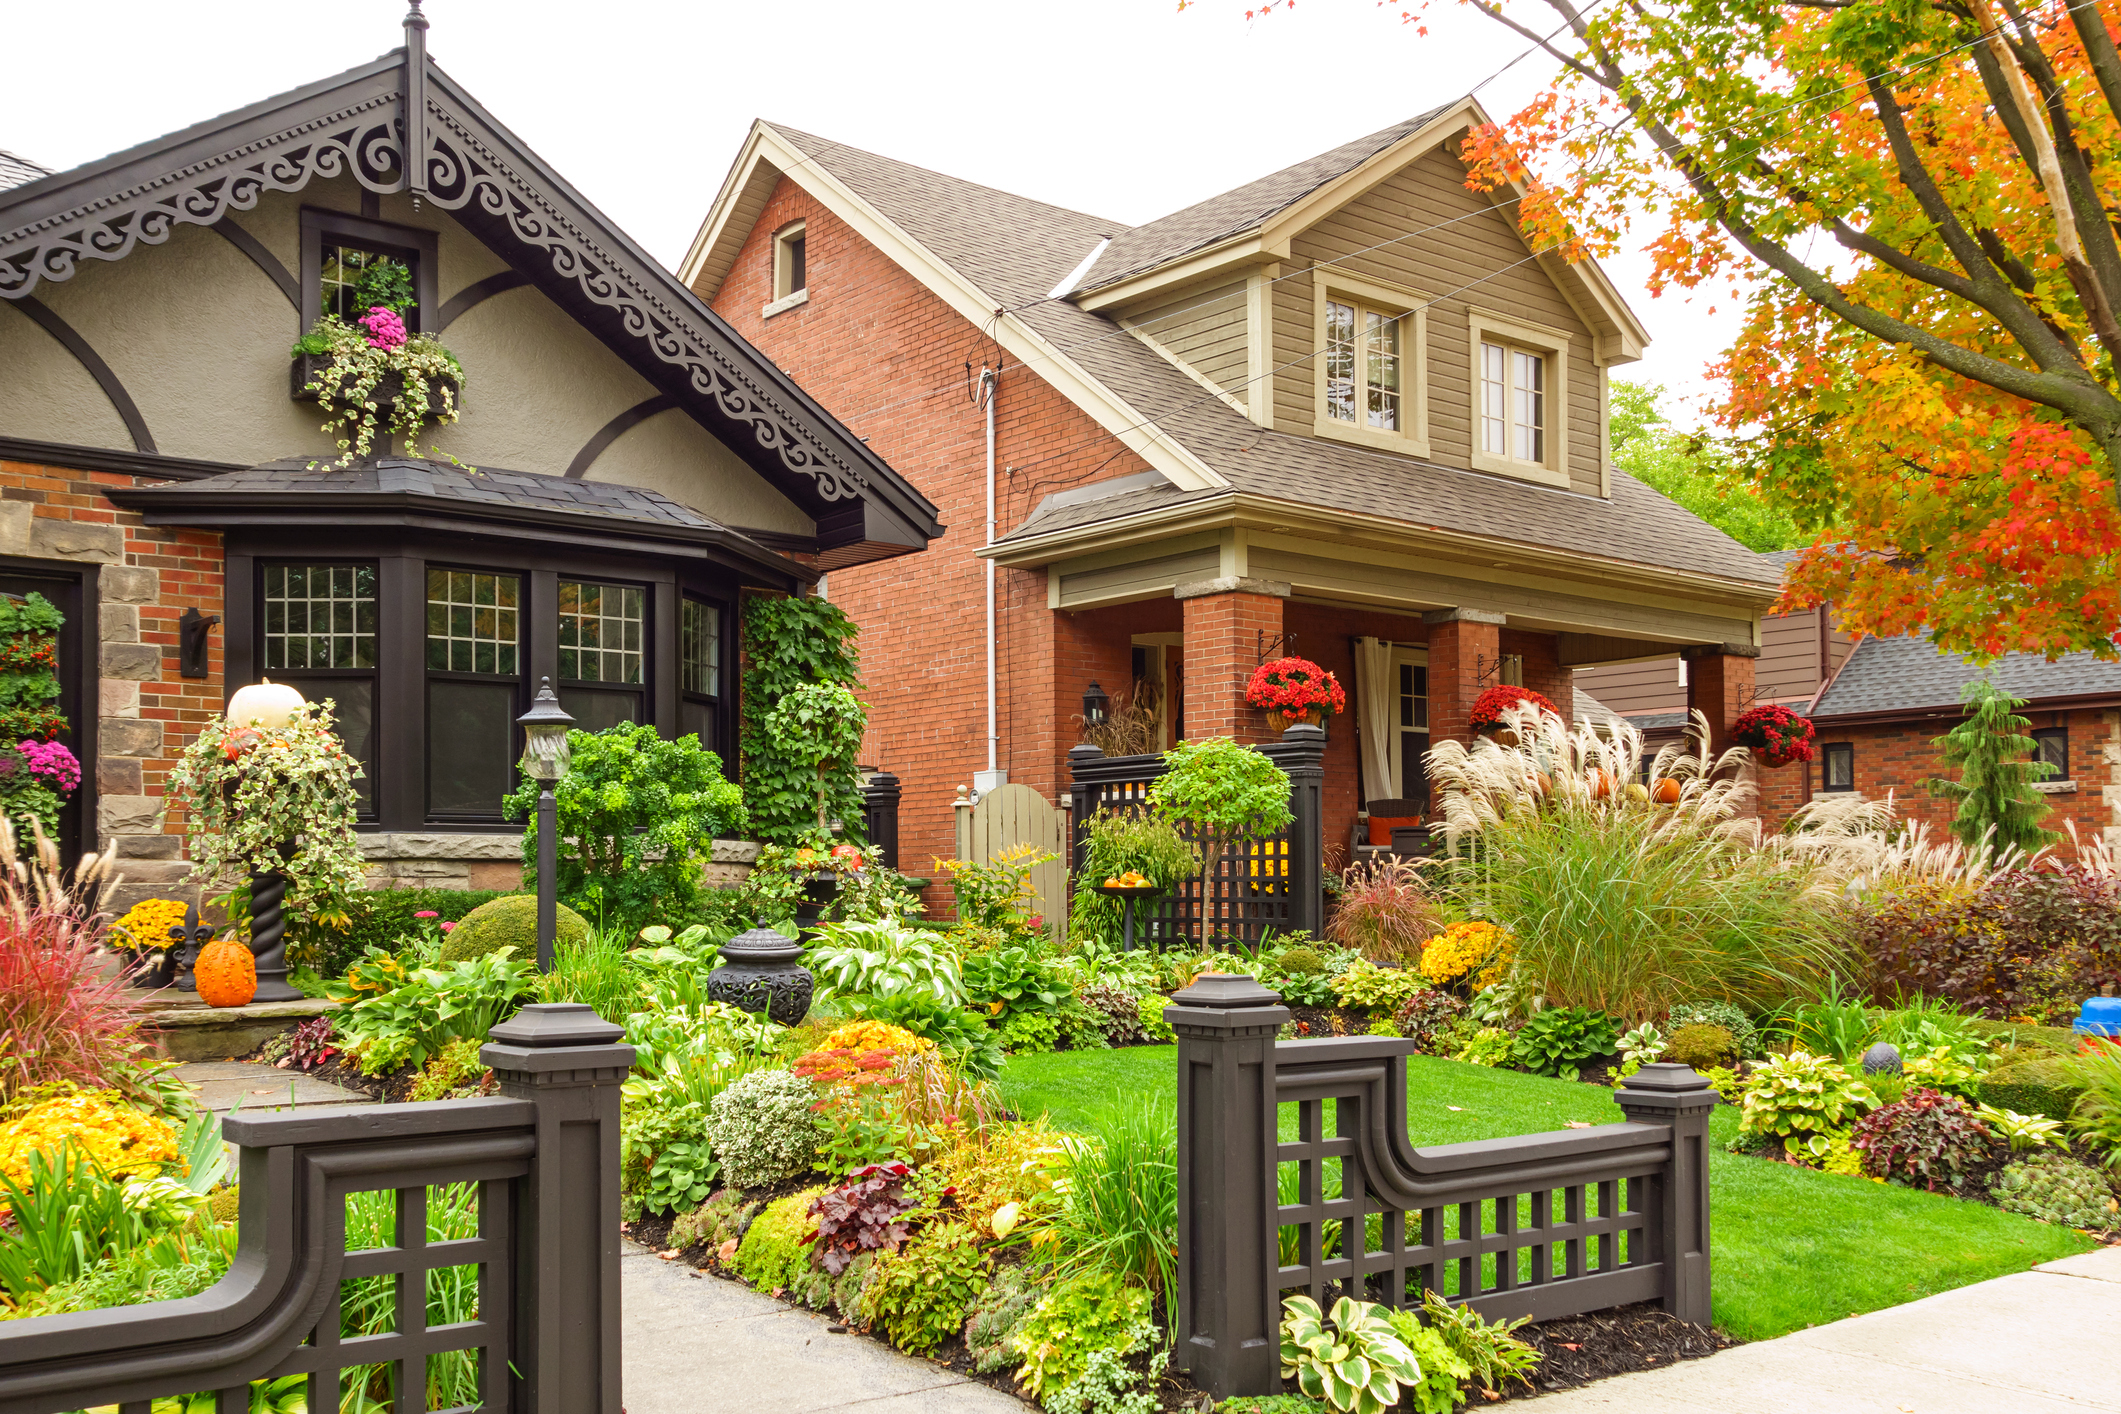 Home in Hamilton the Best Option to Invest in Ontario